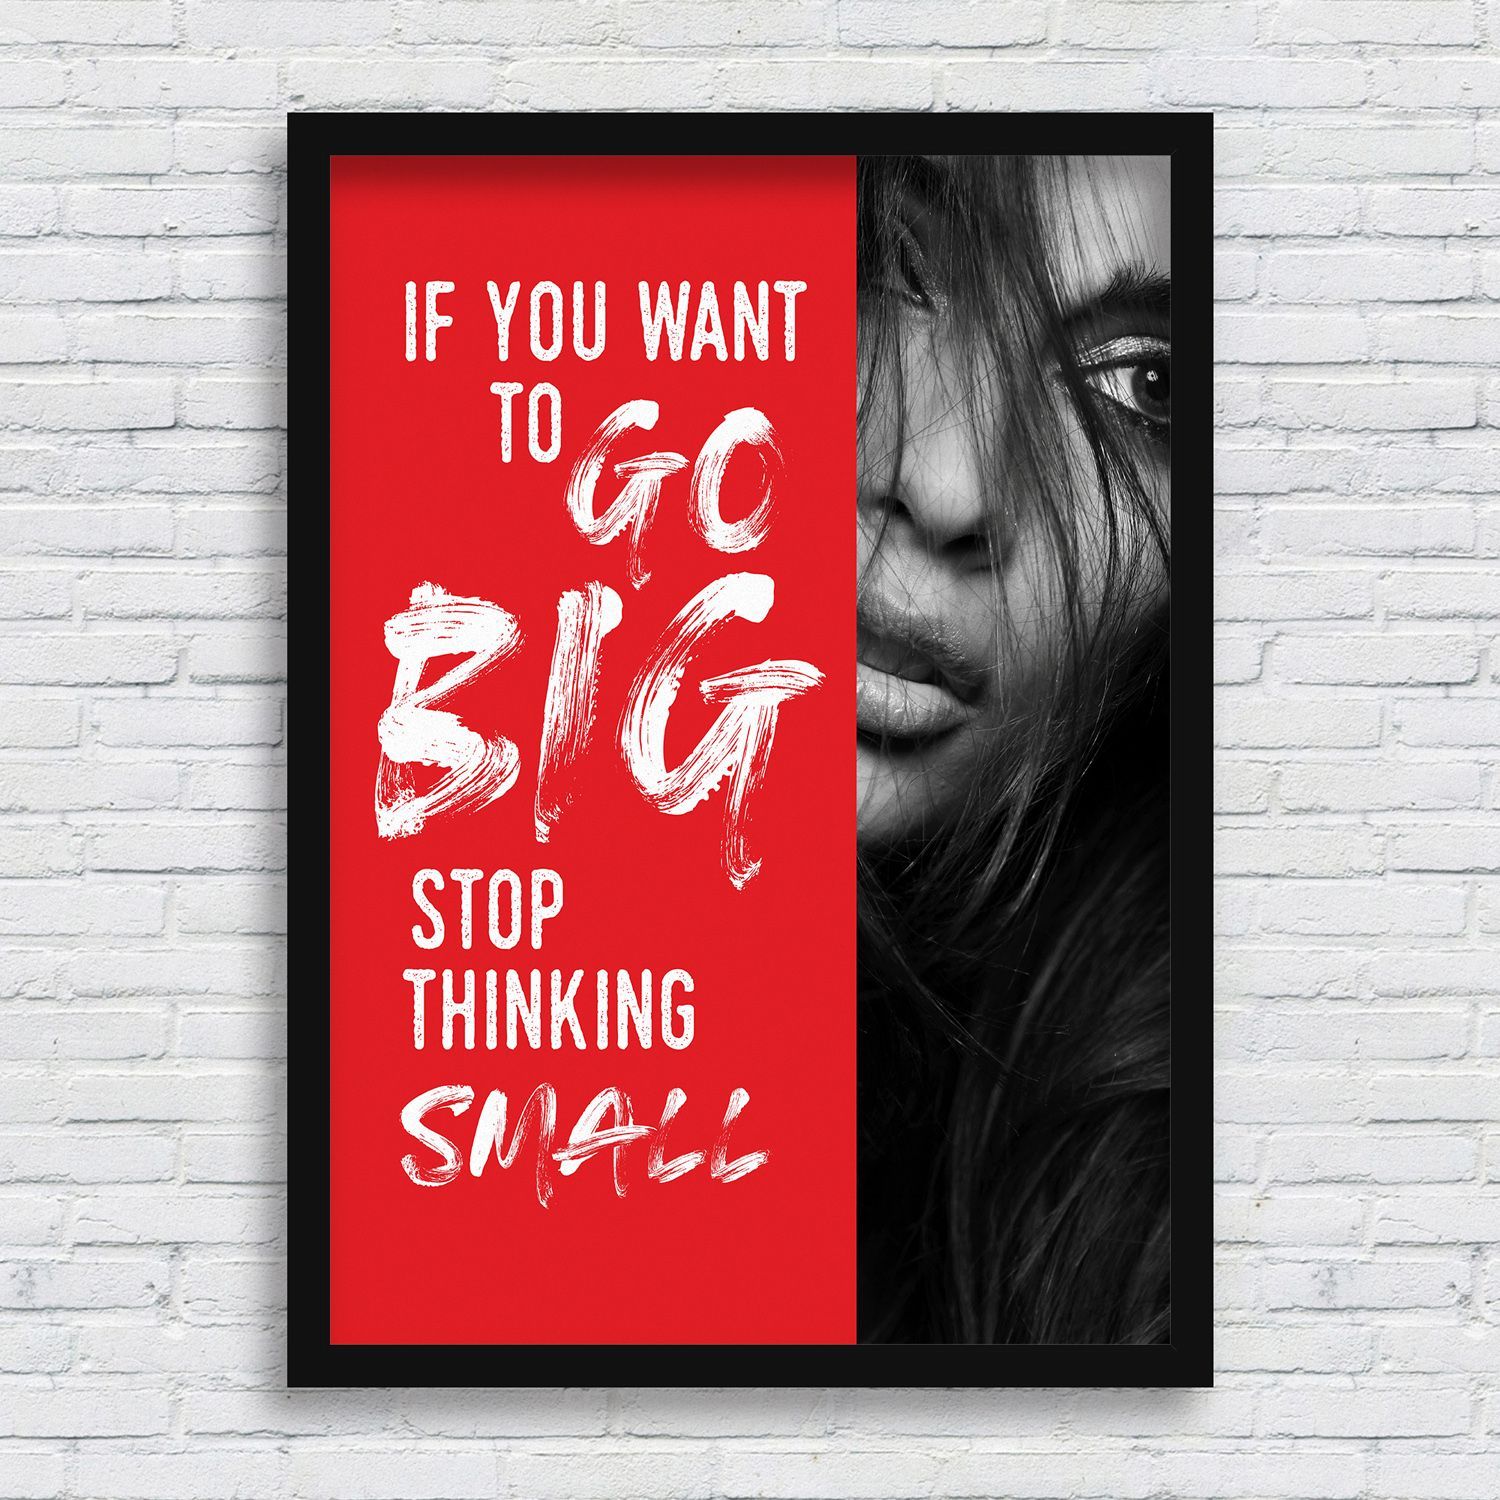 Постер "If you want to go BIG"